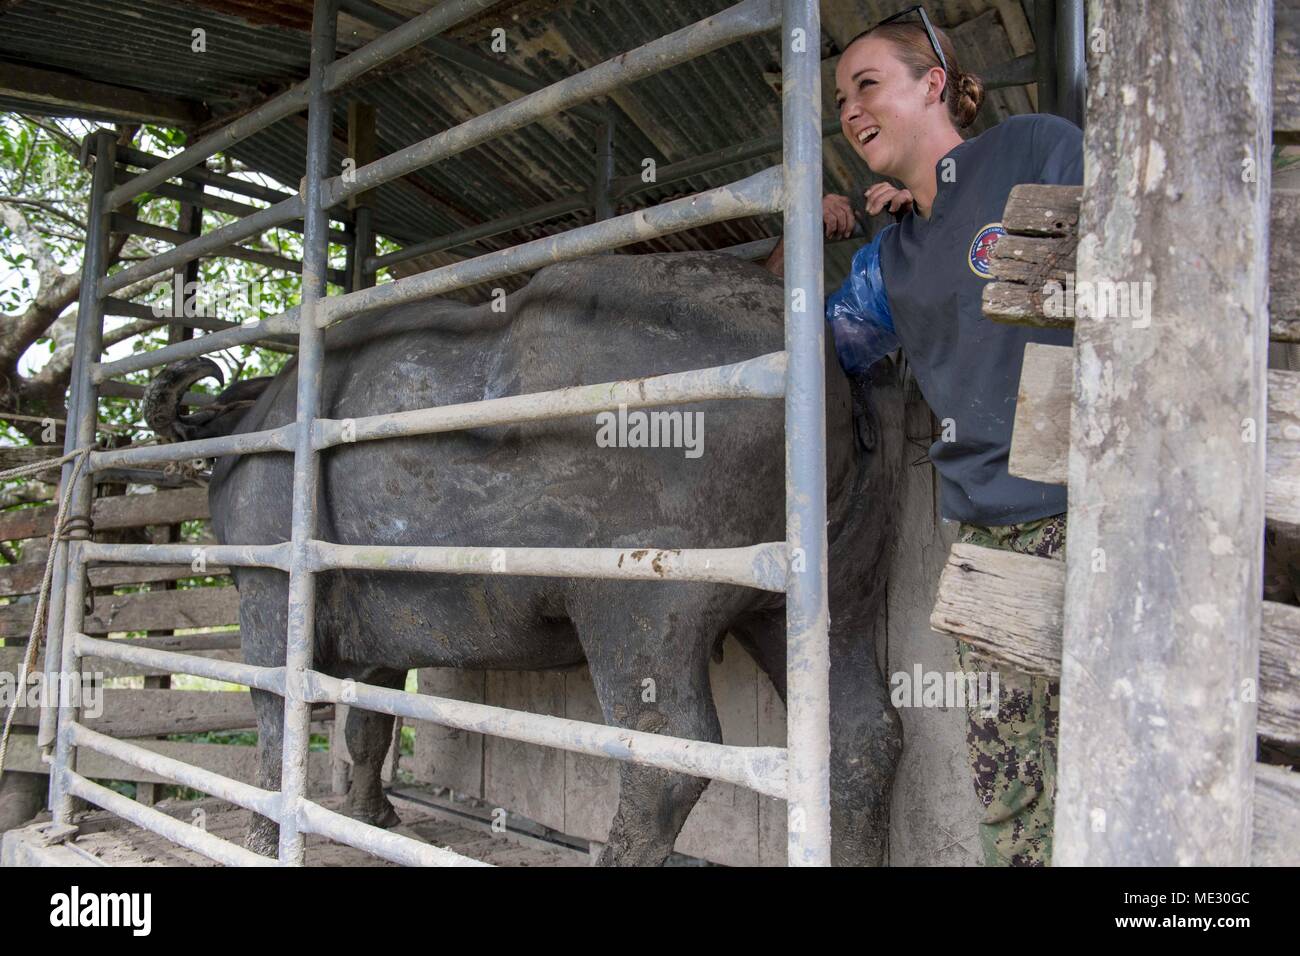 180417-N-HB733-0487 PUERTO BARRIOS, Guatemala  (April 17, 2018) Hospital Corpsman 3rd Class Haley Lugiano of Nokesville, Virginia, performs a rectal exam on a water buffalo to determine if she is pregnant at the Hacienda La Providencia Farm in Puerto Barrios, Guatemala during Continuing Promise 2018. U.S. Naval Forces Southern Command/U.S. 4th Fleet has deployed a force to execute Continuing Promise to conduct civil-military operations including humanitarian assistance, training engagements, and medical, dental, and veterinary support in an effort to show U.S. support and commitment to Central Stock Photo